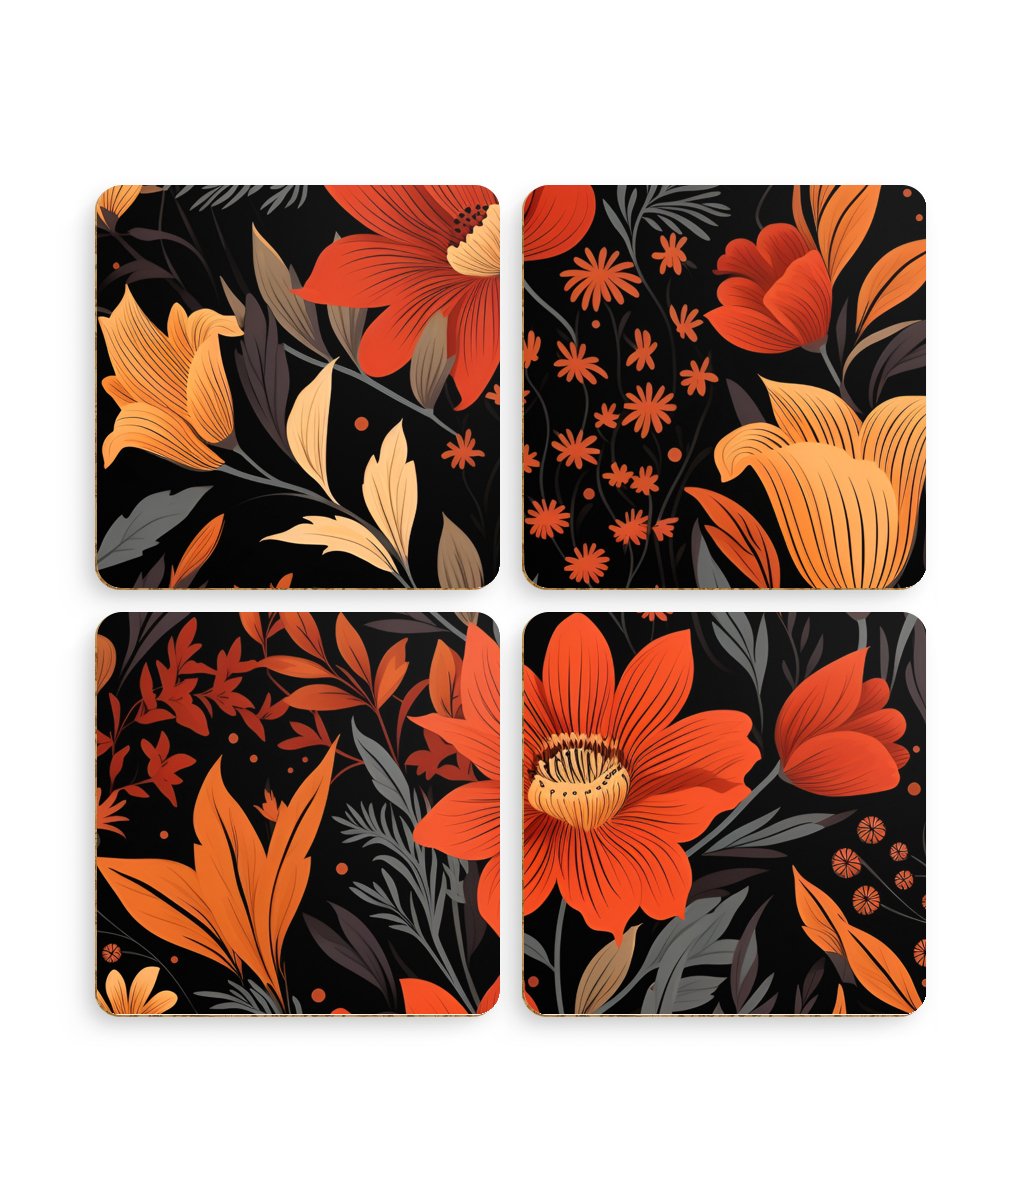 Autumn Blossom Noir: A Dark Floral Canvas - Pack of 4 Coasters - Pattern Symphony